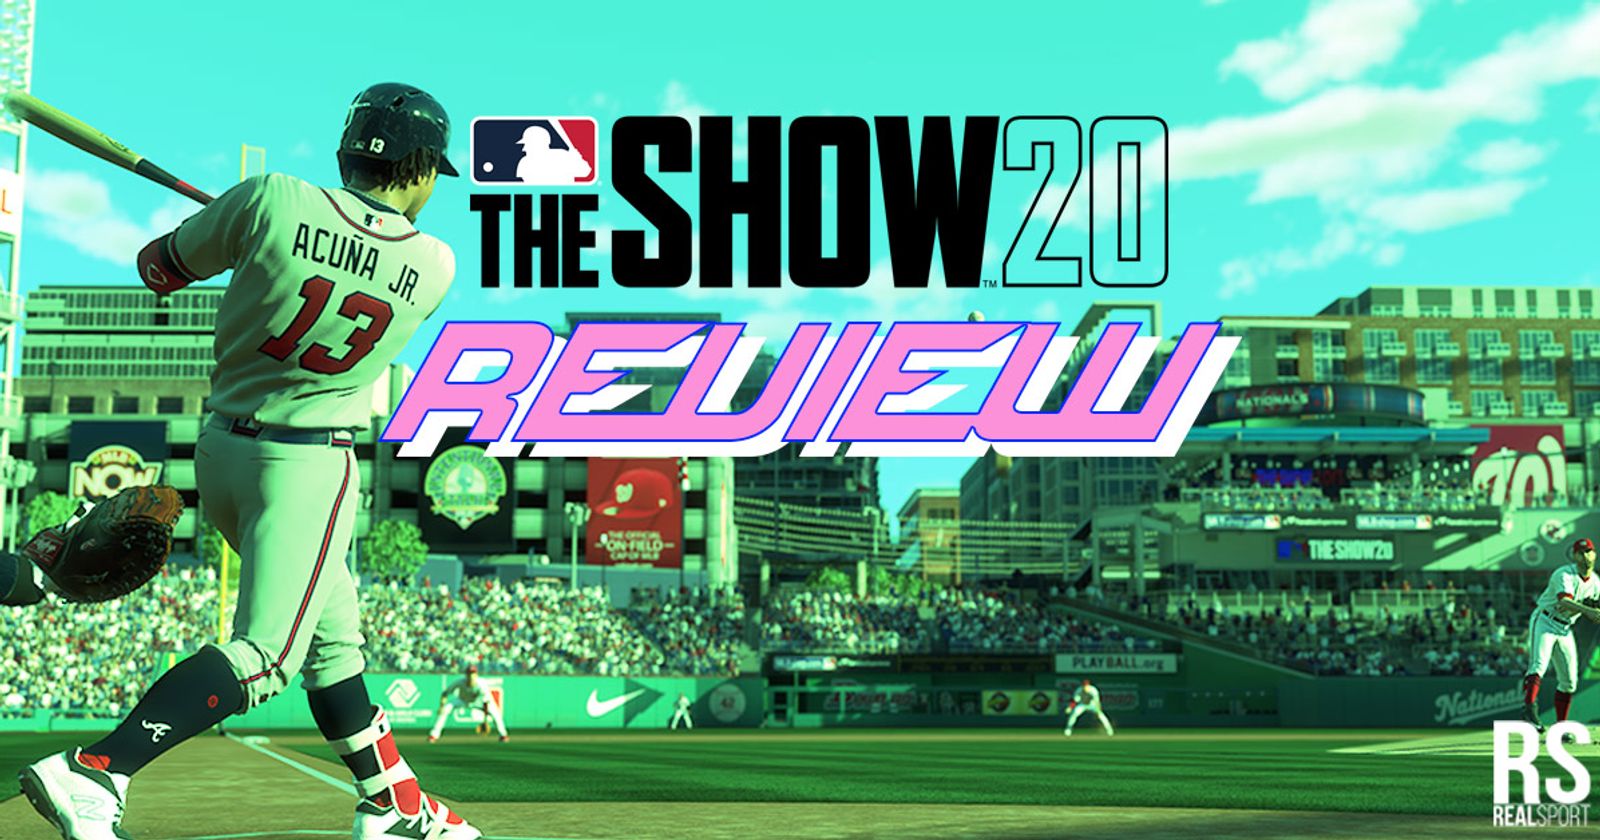 MLB The Show 20 review: 'I see great things in baseball